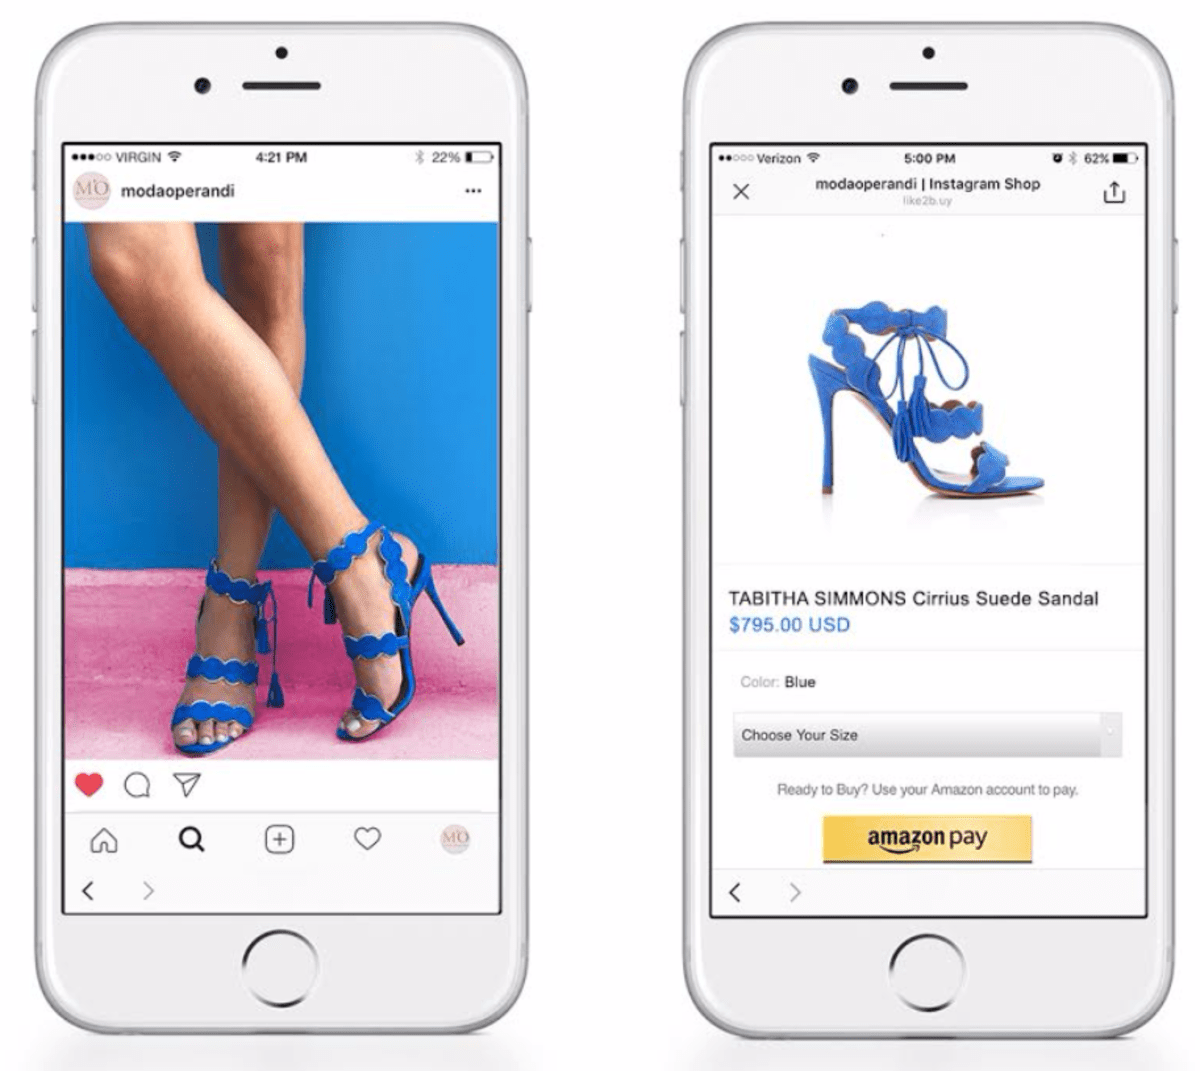 Amazon uses Instagram Shop feature to boost conversions